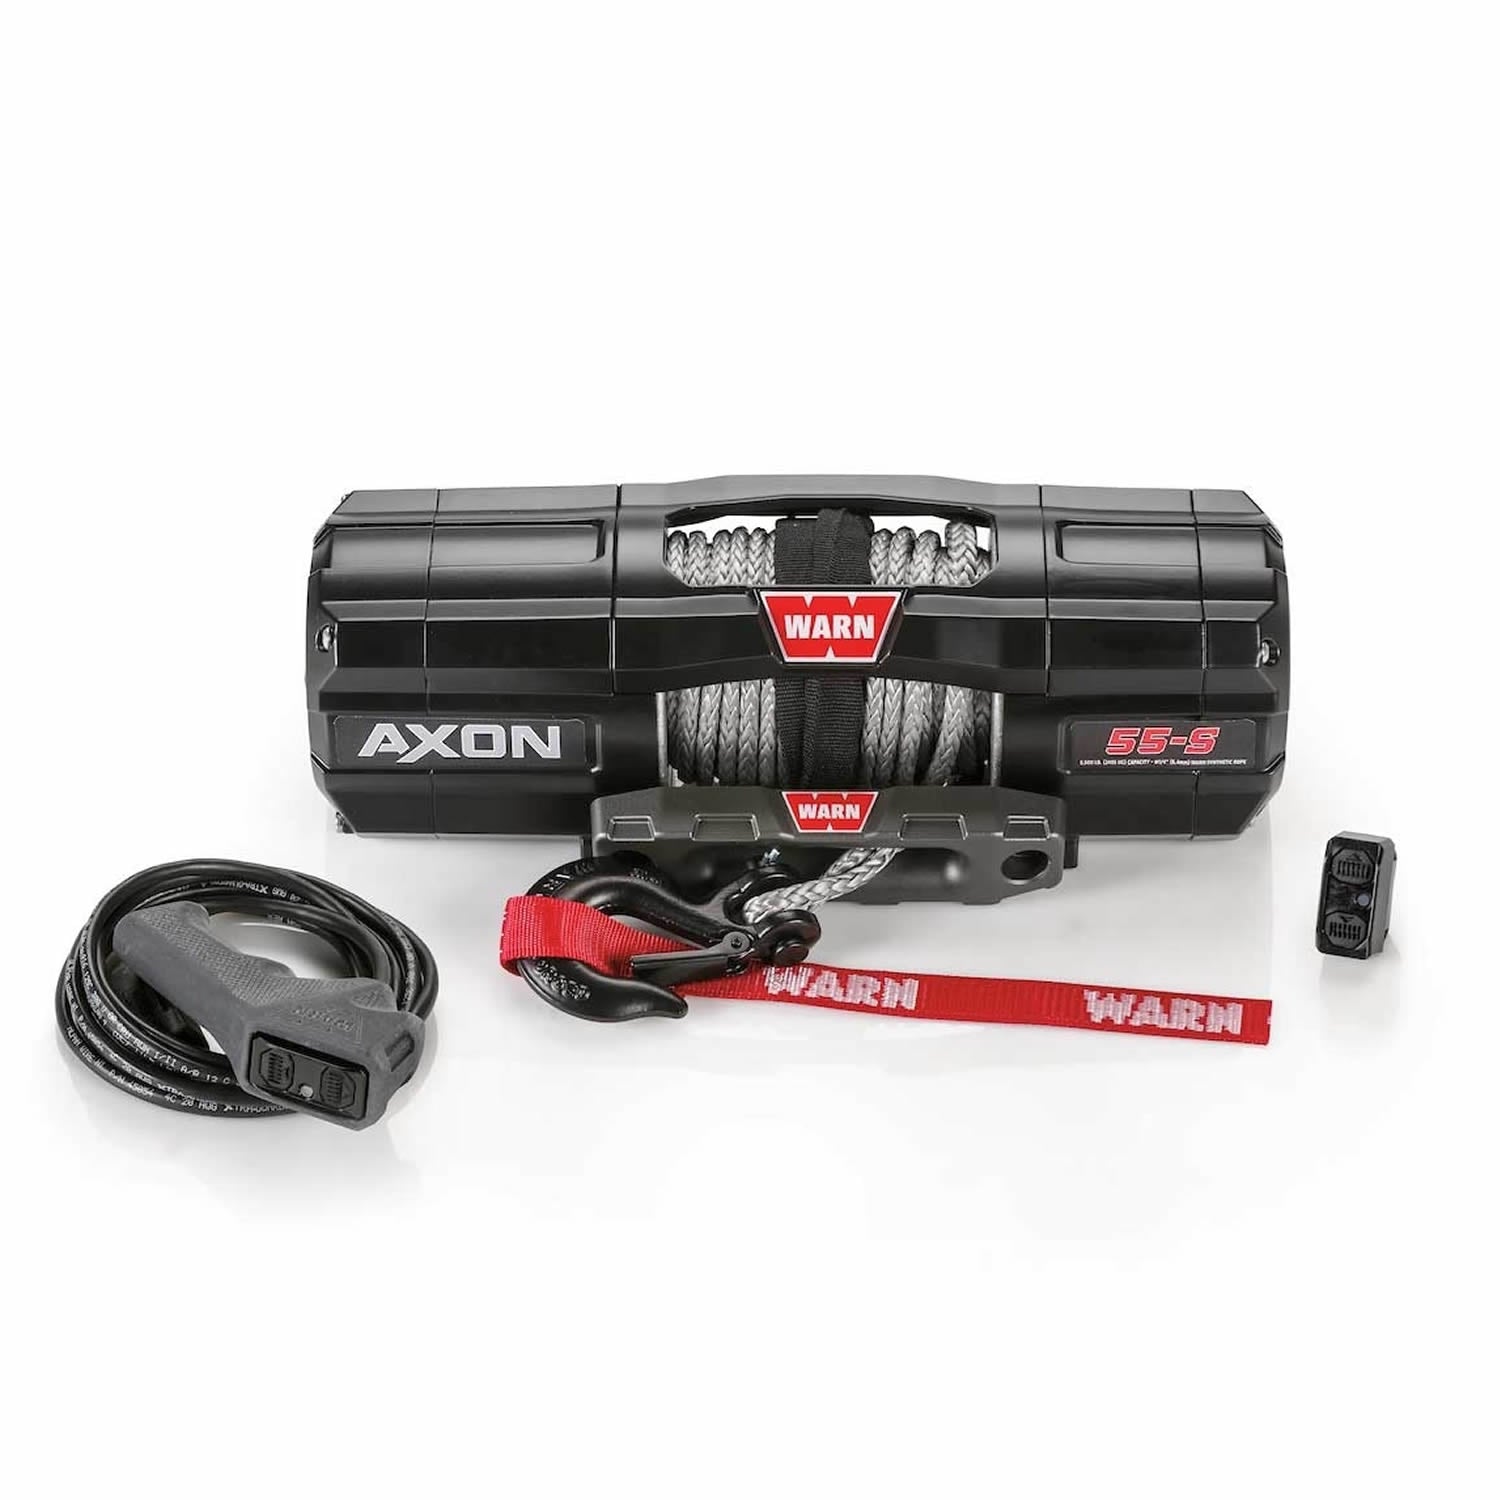 Warn recovery kit, Winch accessories, Recovery gear